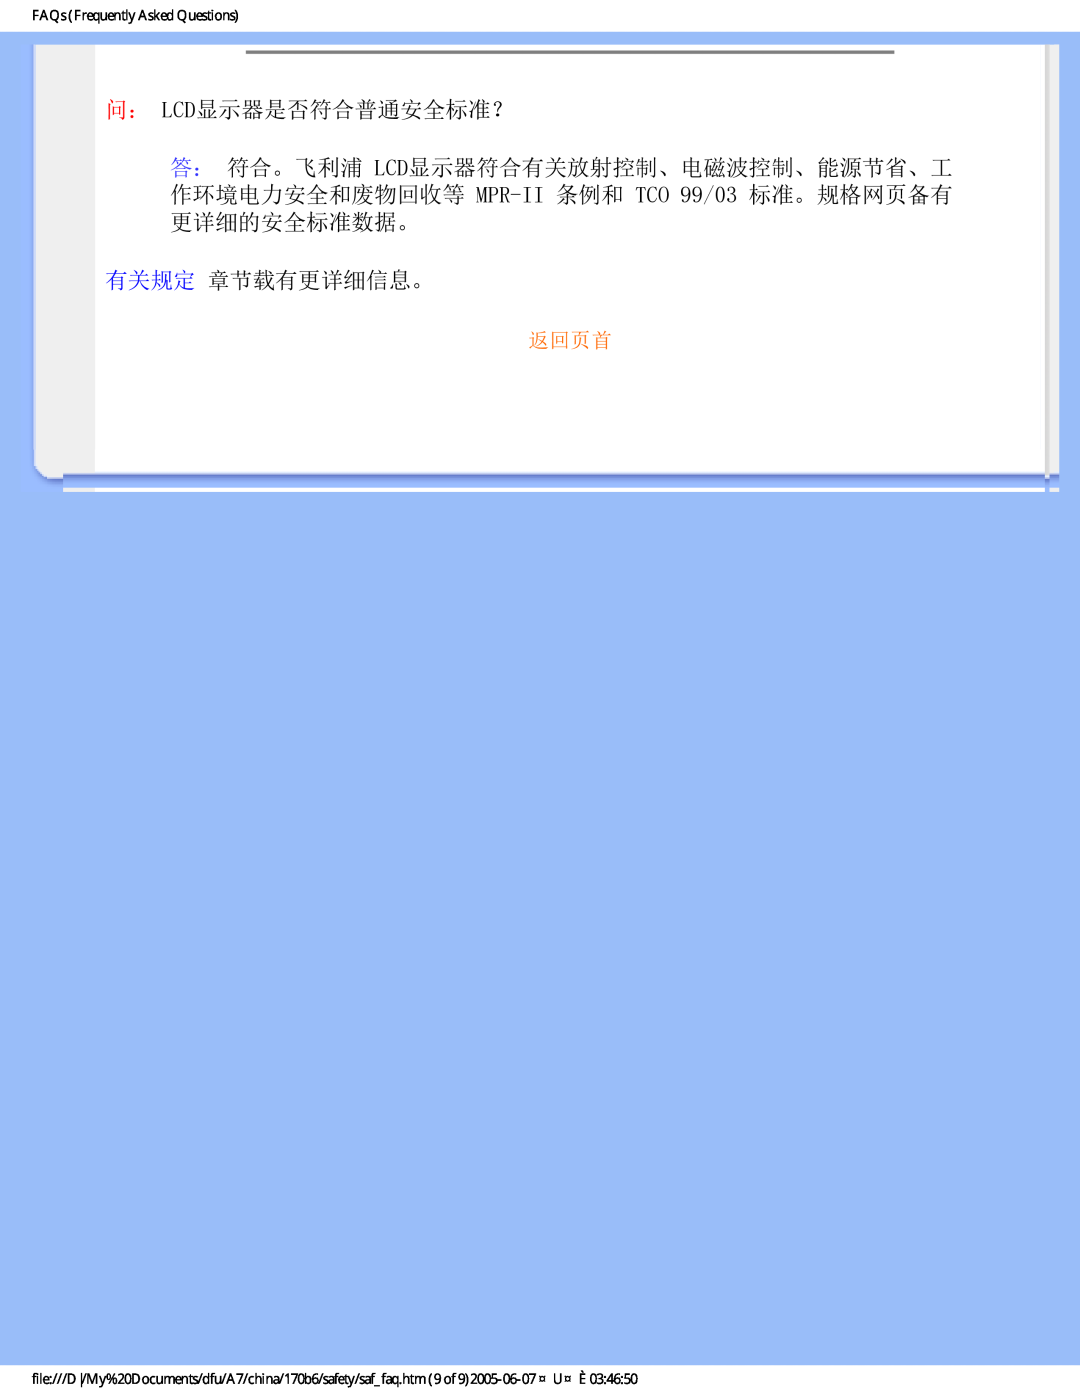 Philips 170B6 user manual 问： Lcd显示器是否符合普通安全标准？, 有关规定 章节载有更详细信息。, 返回页首, FAQs Frequently Asked Questions 